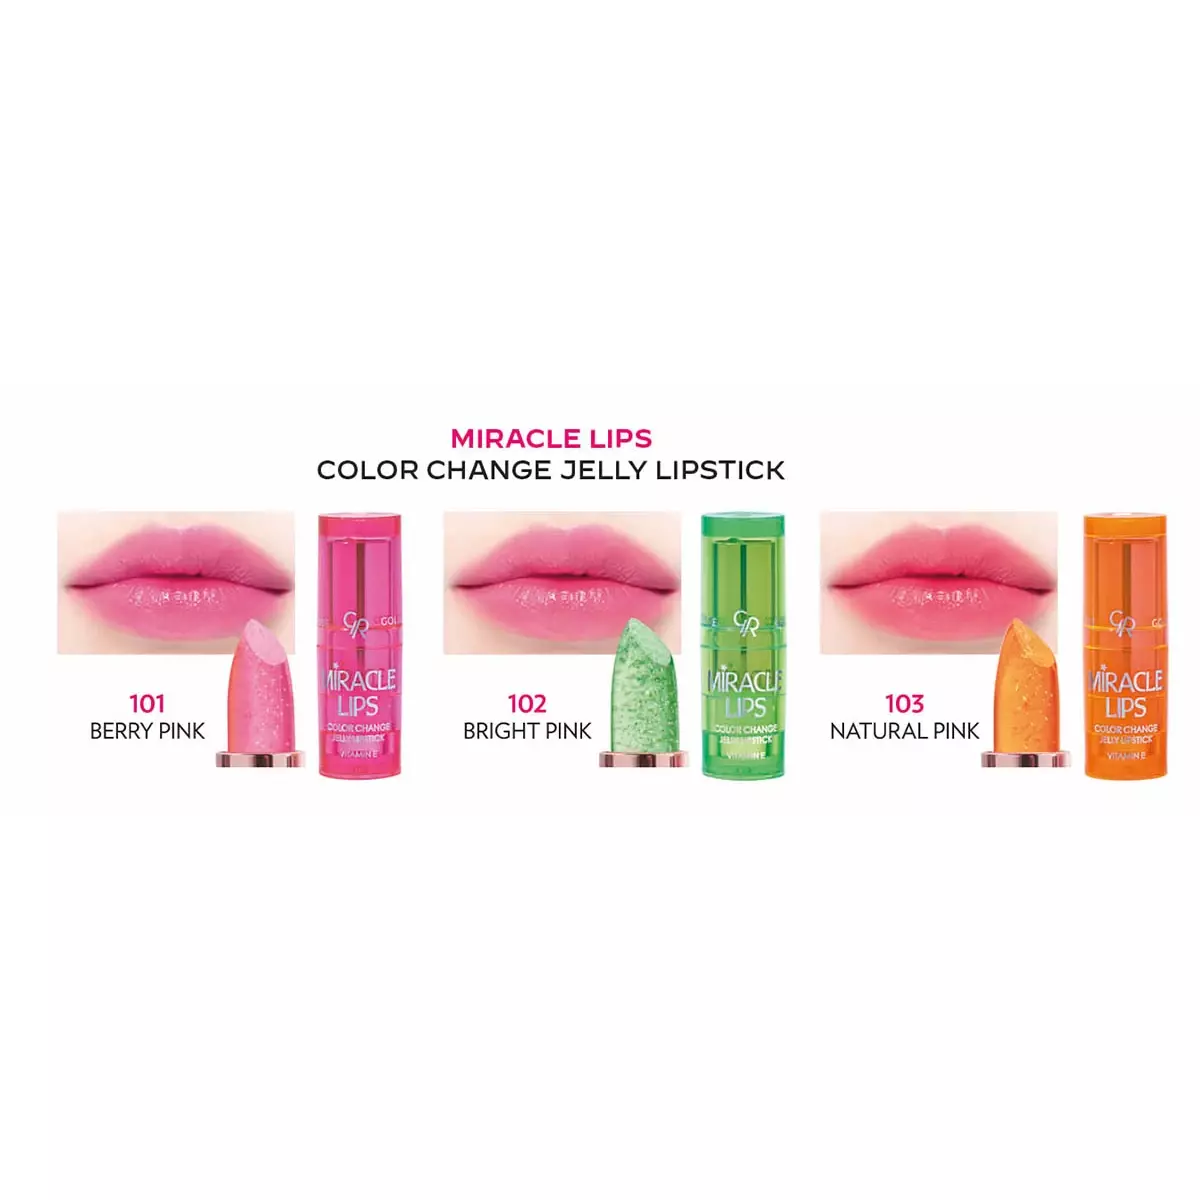 Miracle Lips Color Change Jelly Lipstick - 102 Bright Pink